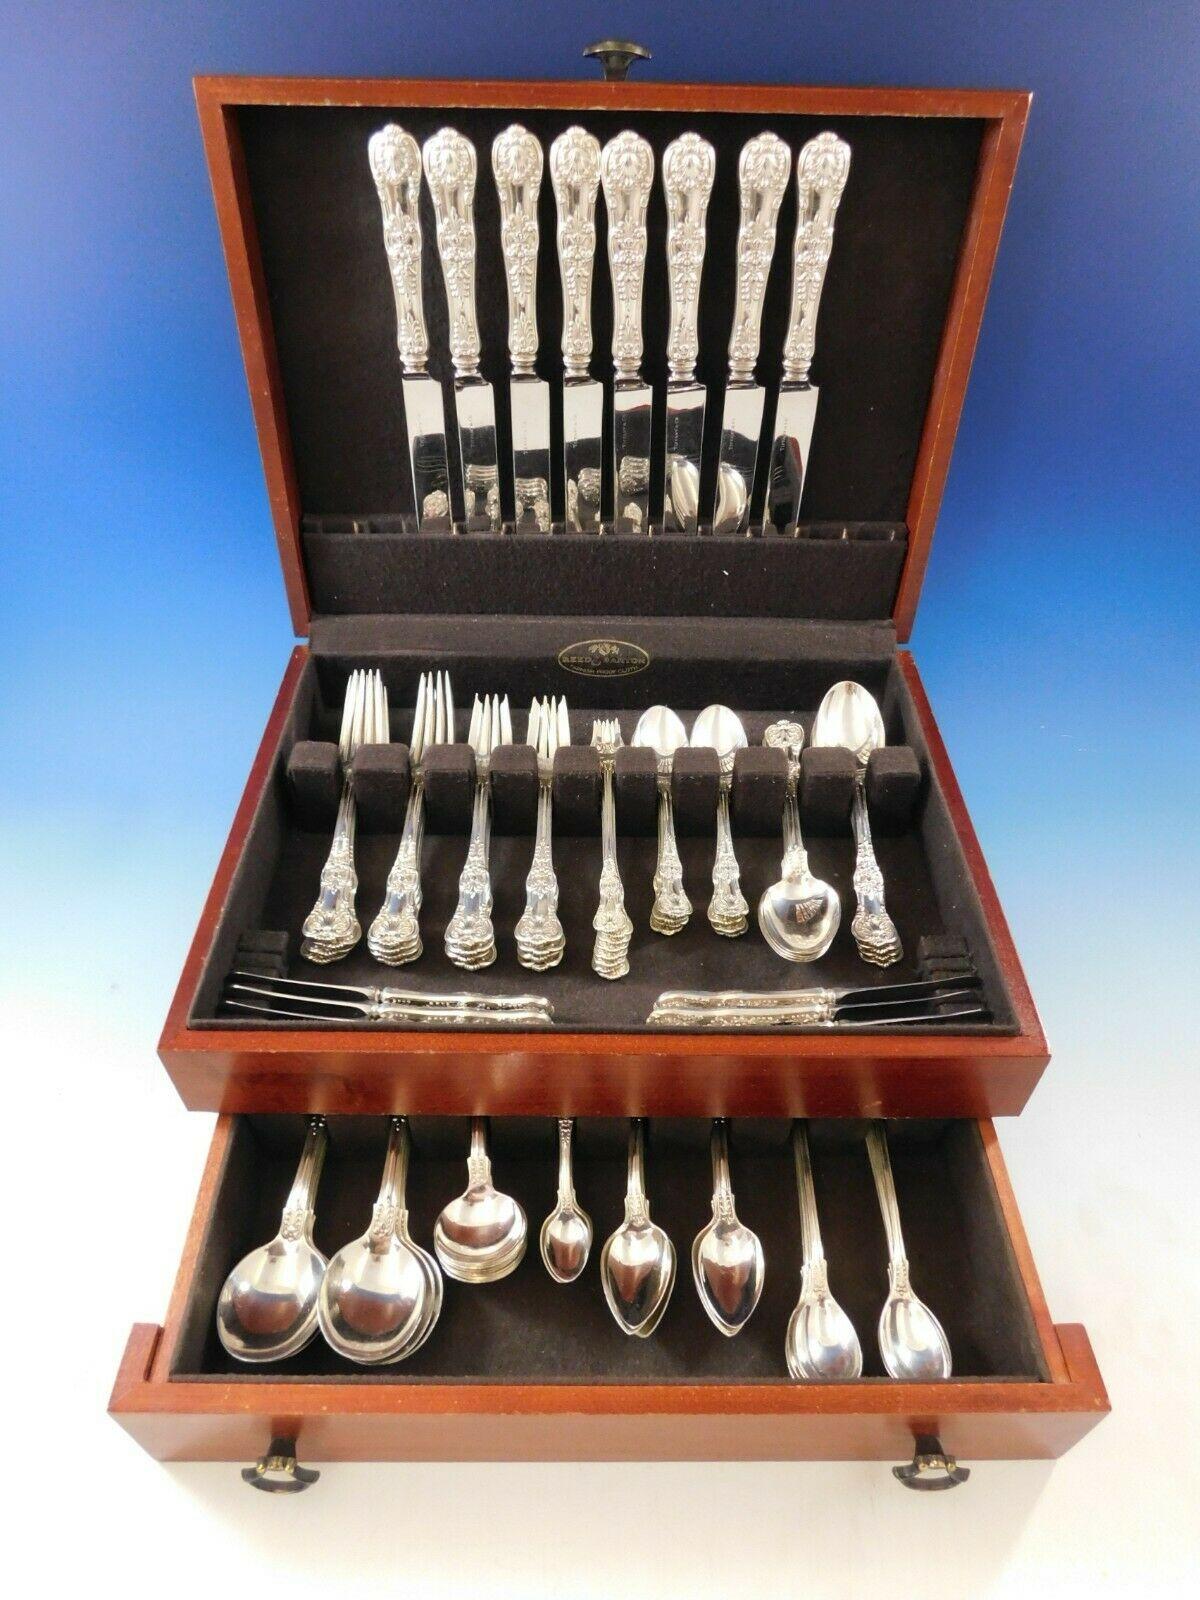 Superb dinner size English King by Tiffany and Co. sterling silver flatware set, 96 pieces. This set includes:

 8 dinner knives, 10 1/4